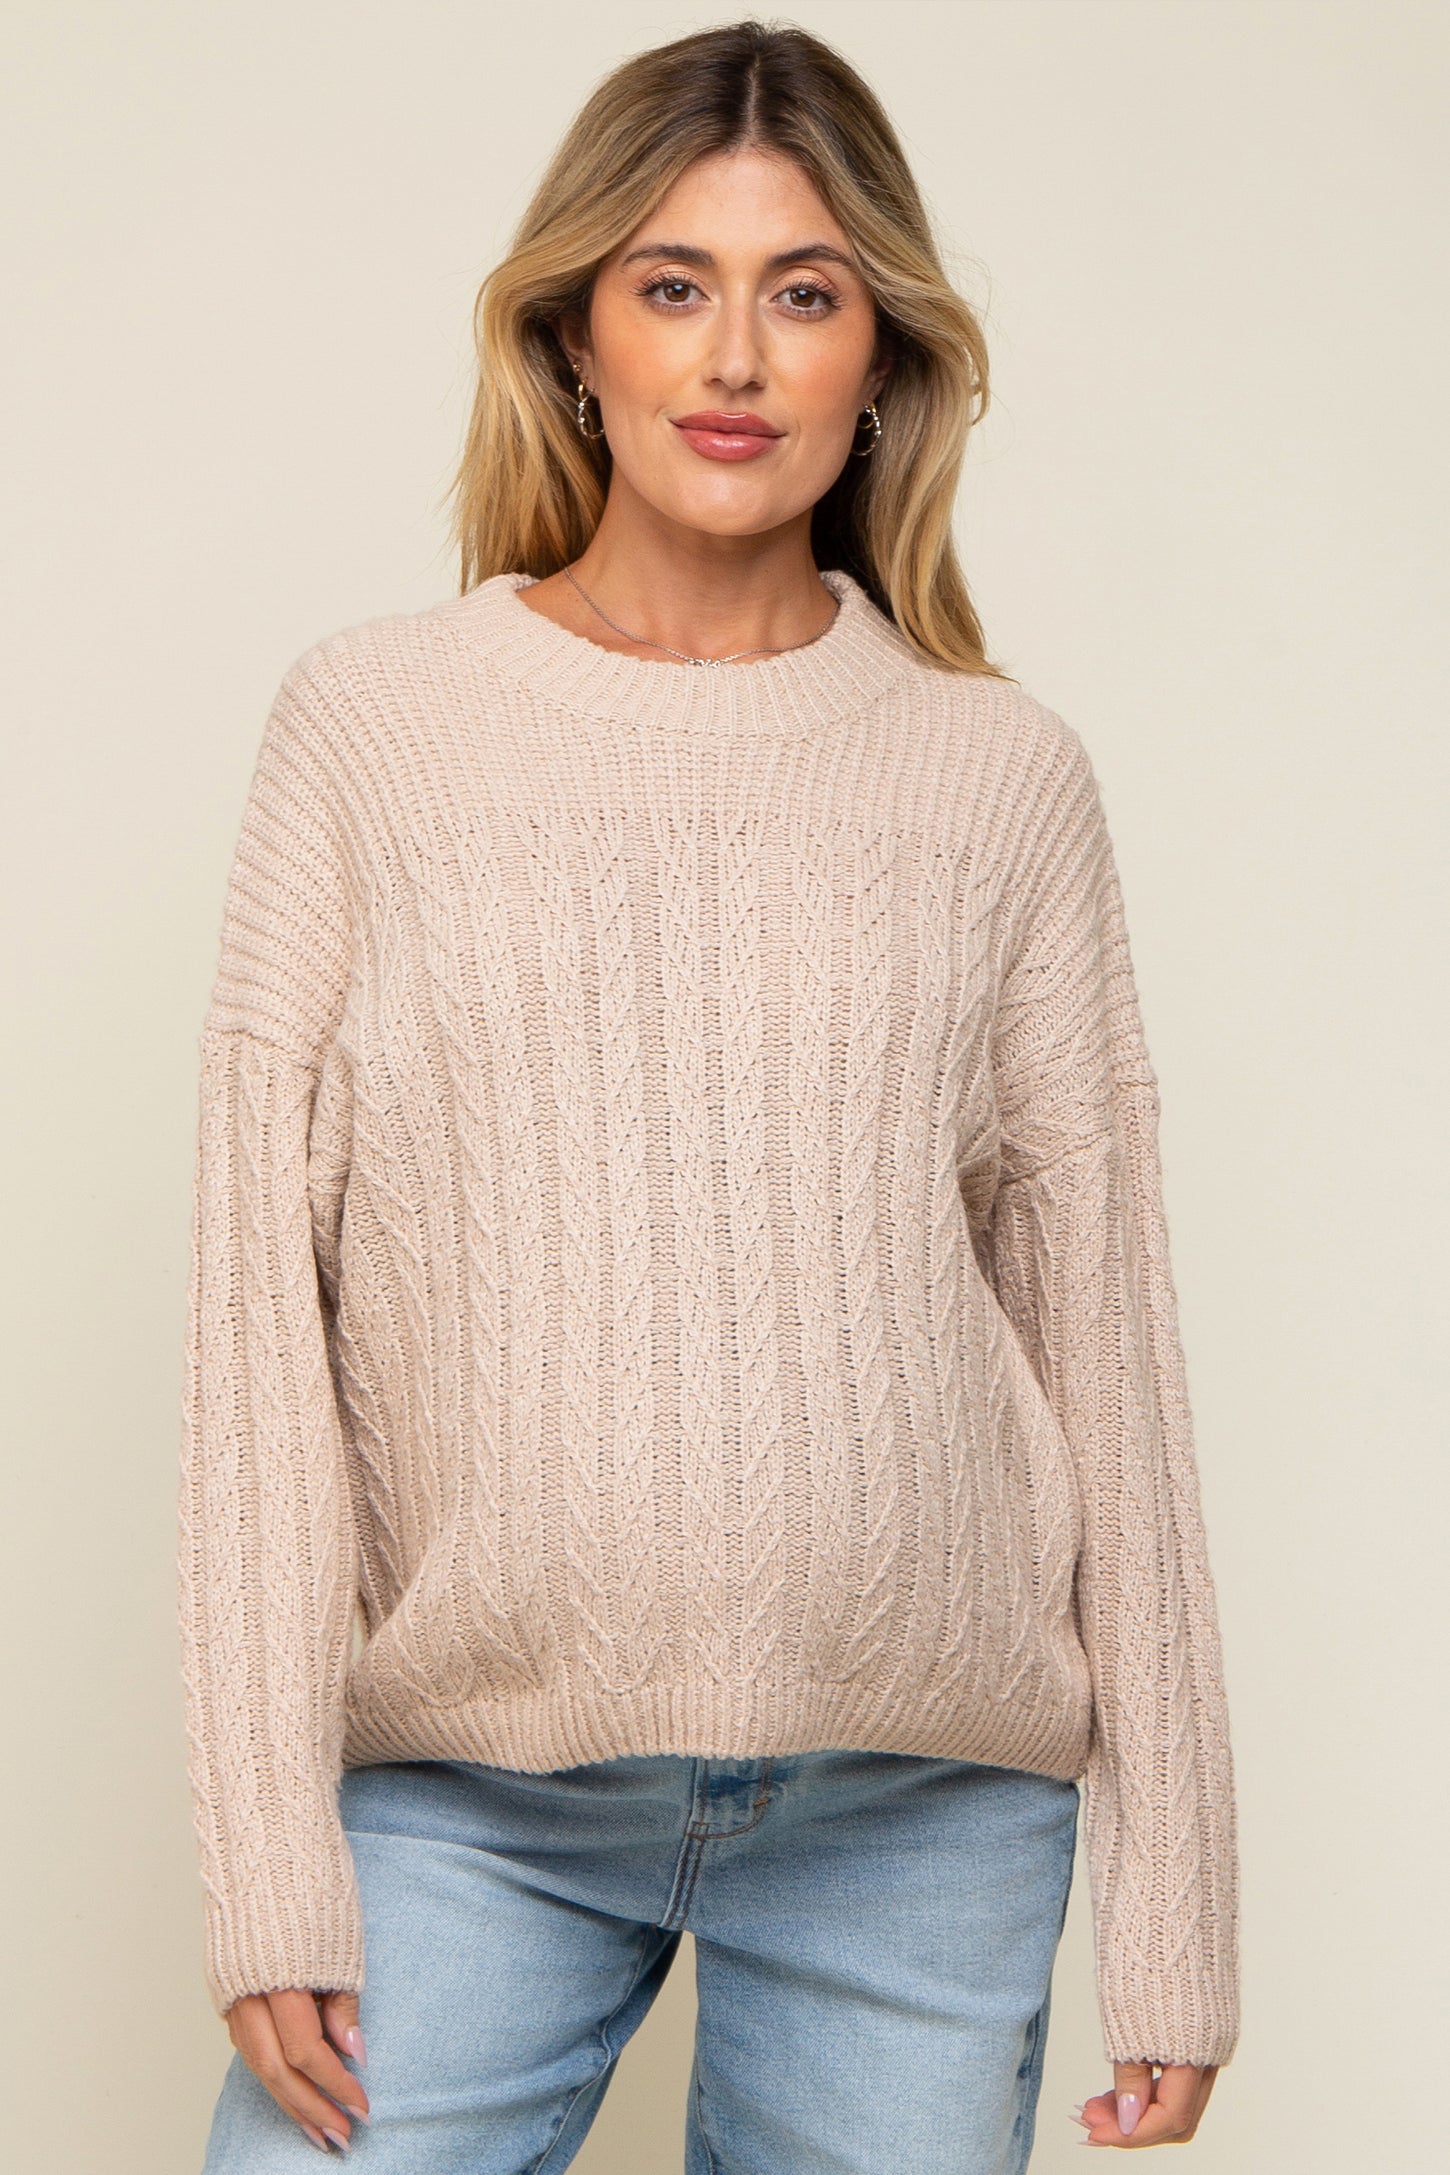 Cream Beige Cable Knit Maternity Sweater– PinkBlush